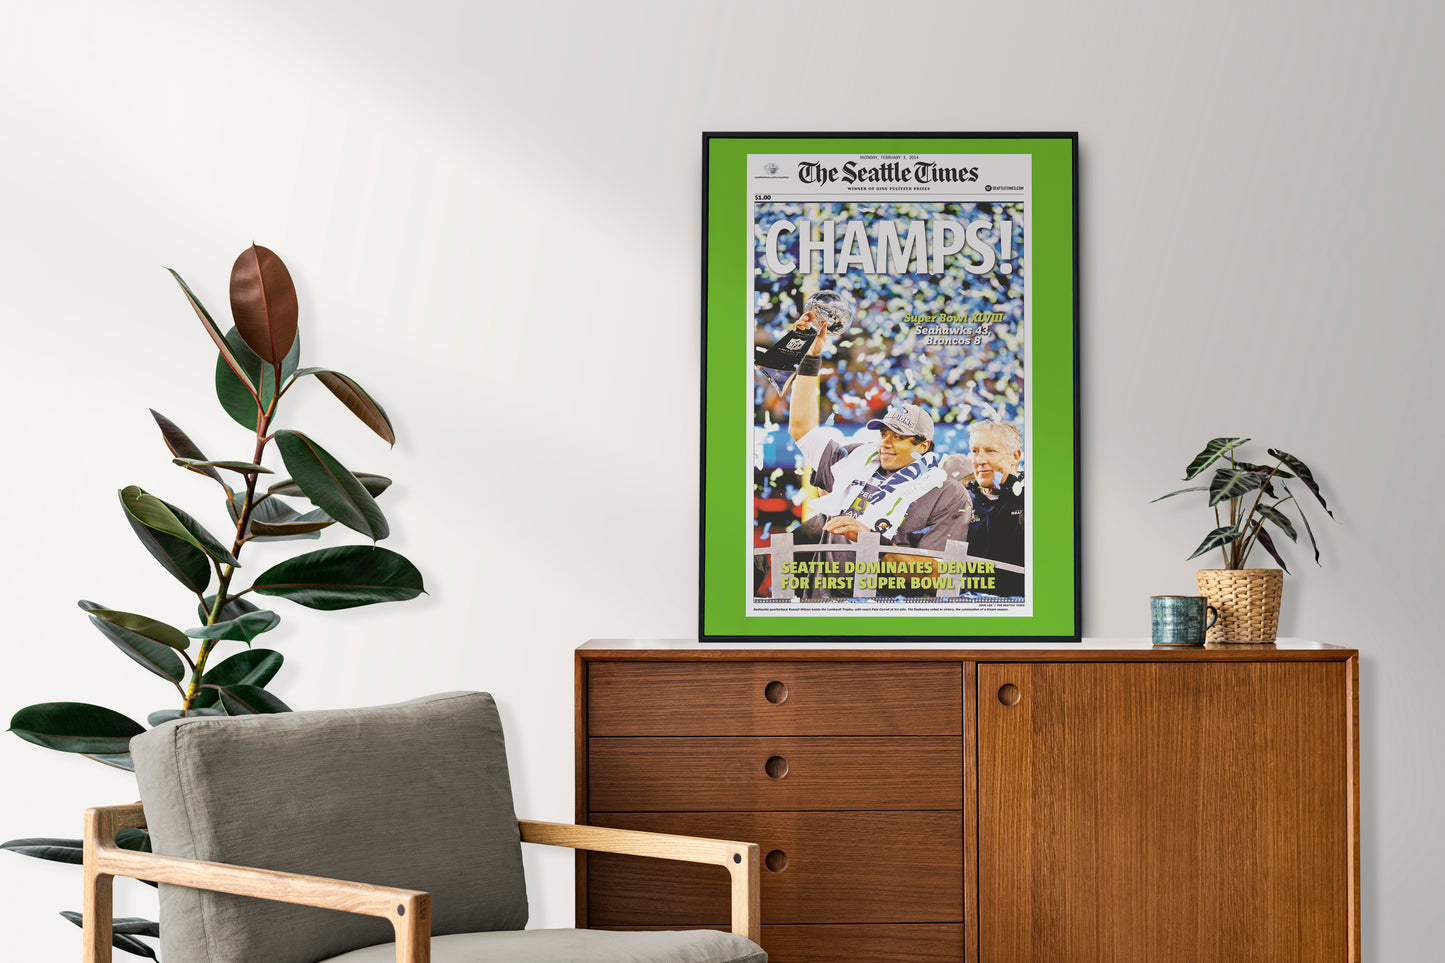 Seattle Seahawks 2014 Super Bowl NFL Champions Front Cover The Seattle Times Newspaper Poster